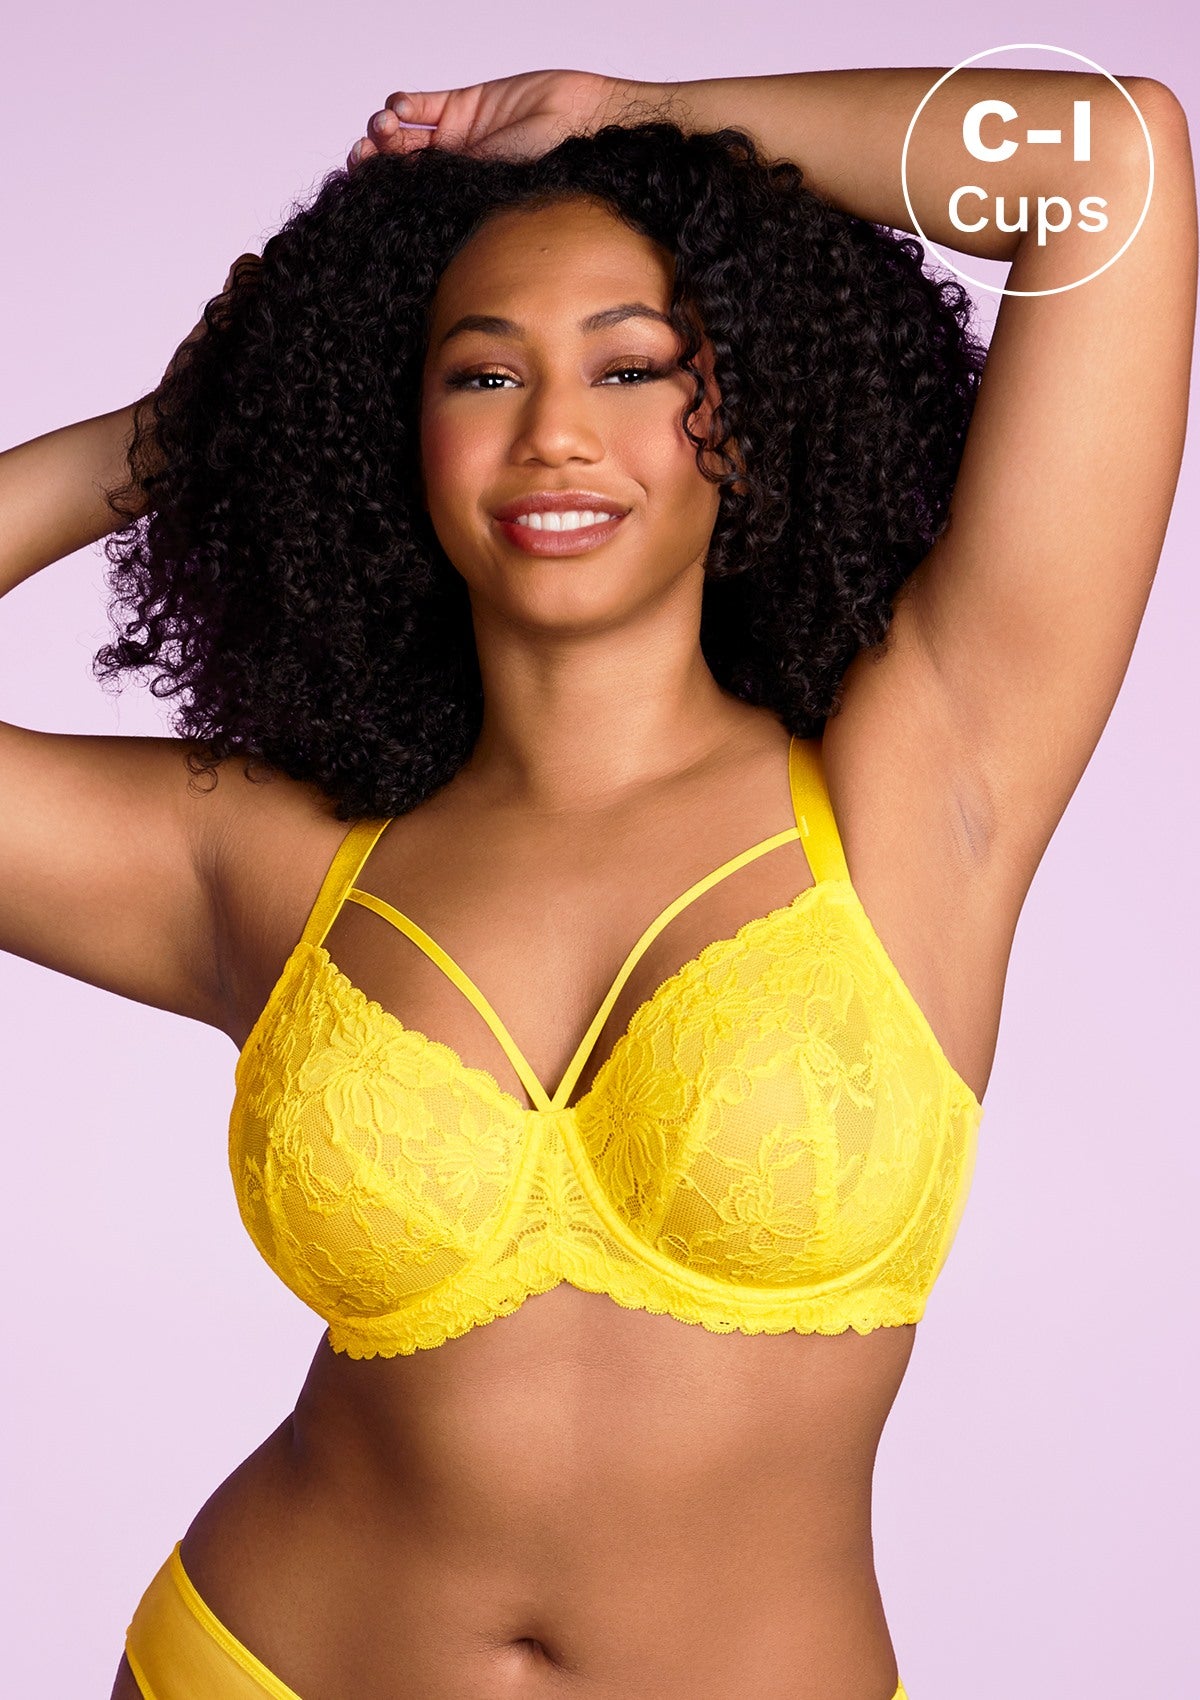 HSIA Unlined Lace Mesh Minimizer Bra For Large Breasts, Full Coverage - Bright Yellow / 40 / G